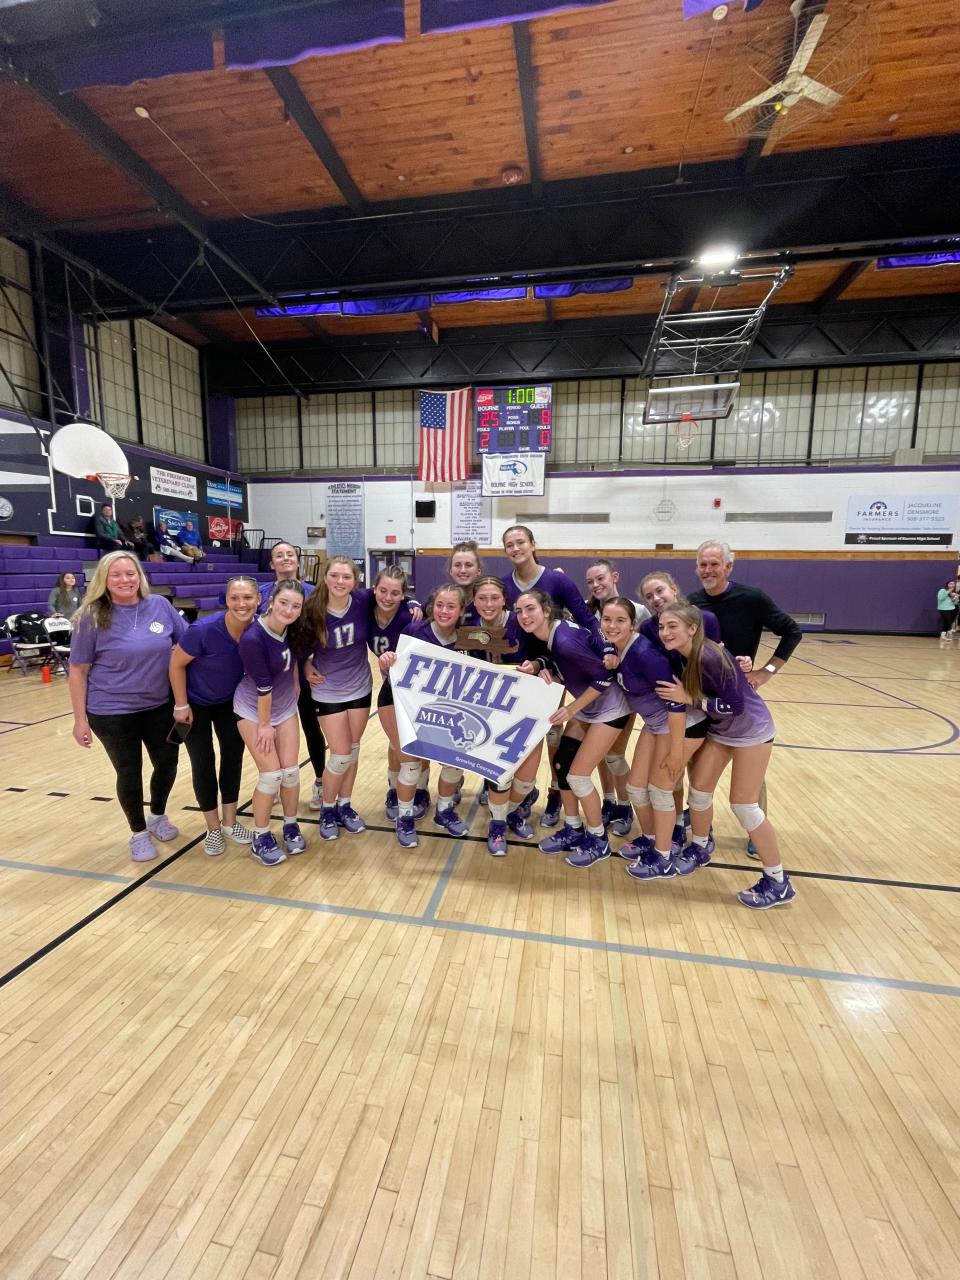 The Bourne girls volleyball team advanced to the Final Four after sweeping Whitinsville Christian.